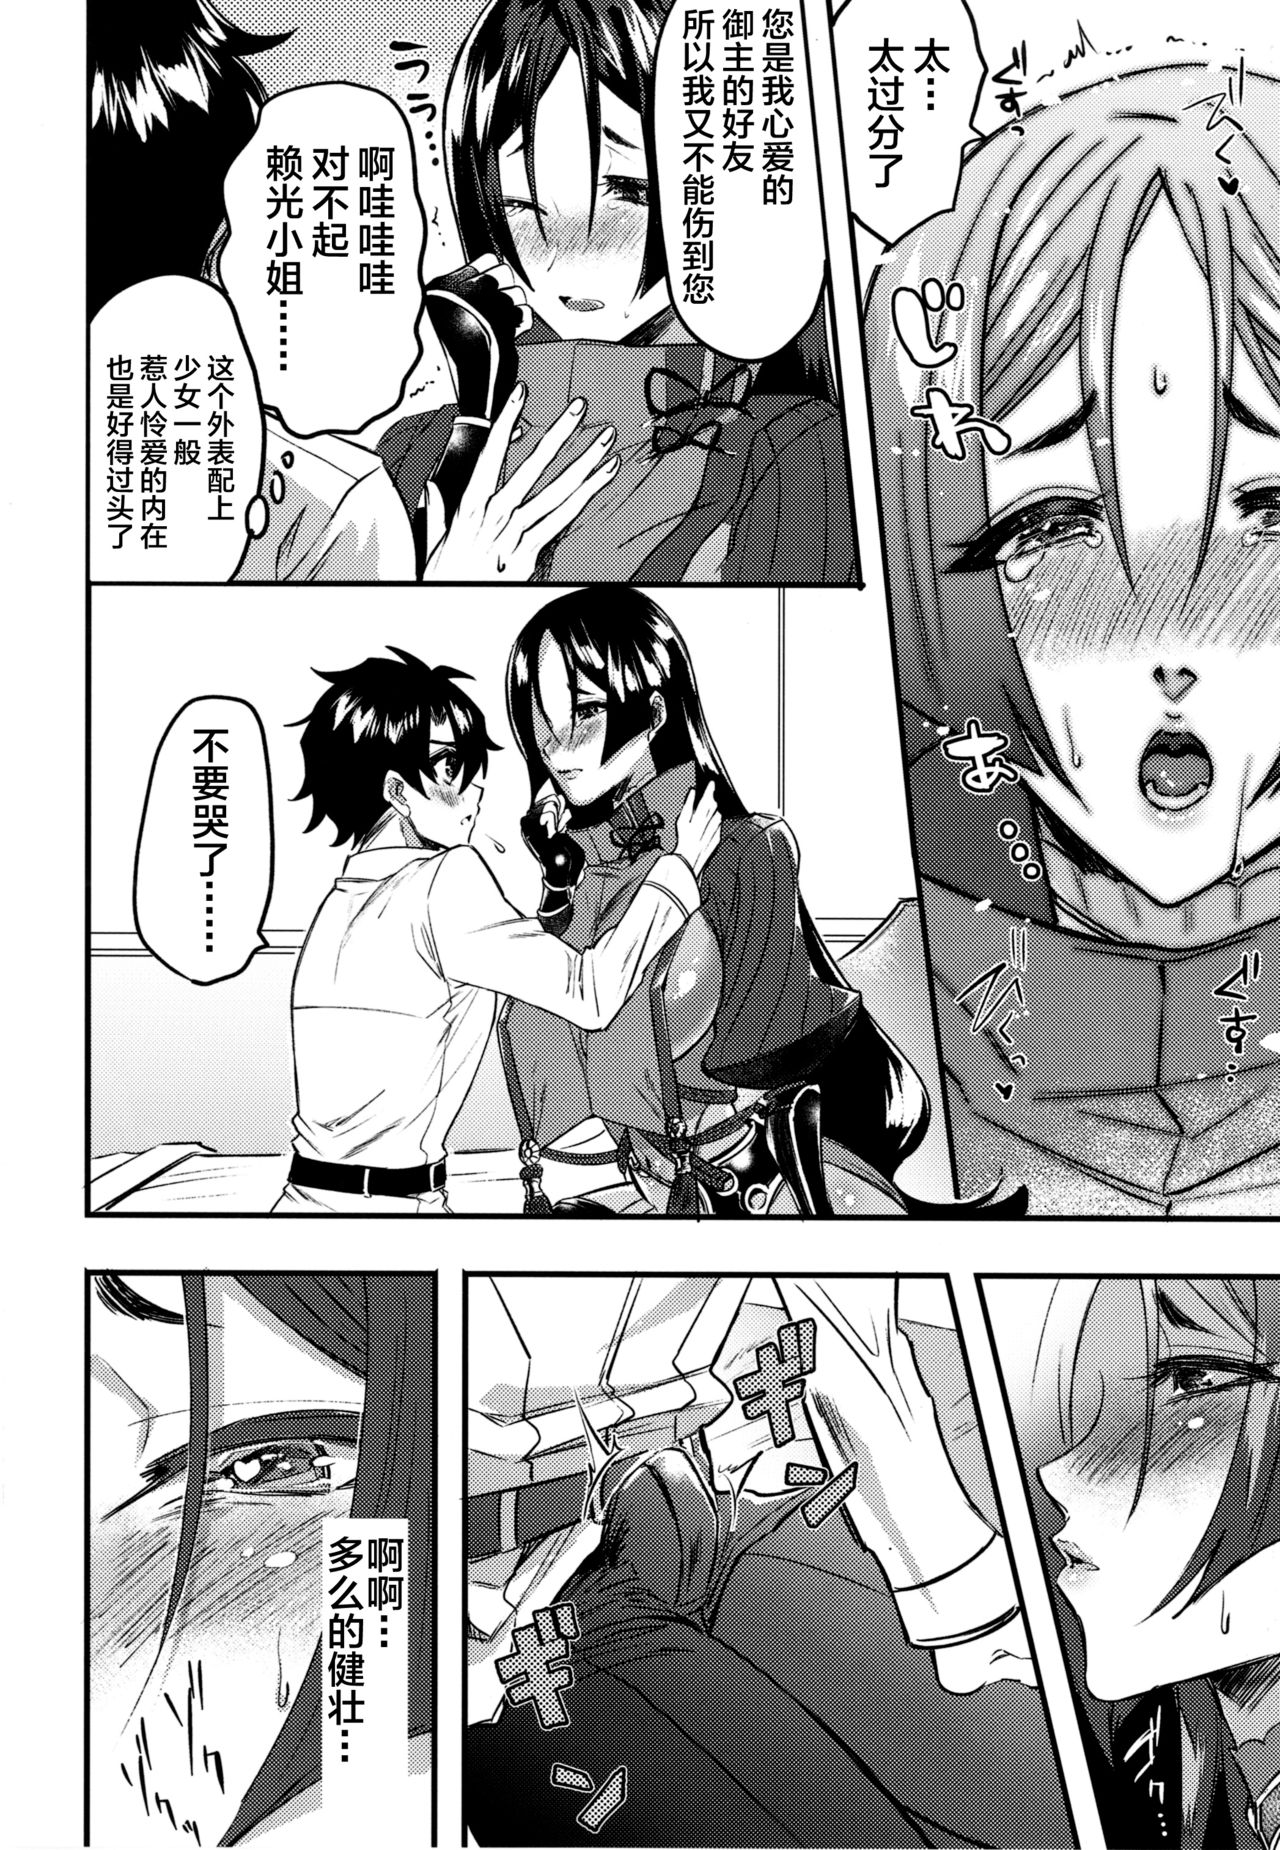 [Chimple Hotters (Chimple Hotter)] +SAPPORT no Raikou Mama to NTR Ecchi (Fate/Grand Order) [Chinese] [黎欧x新桥月白日语社] [Digital] page 12 full